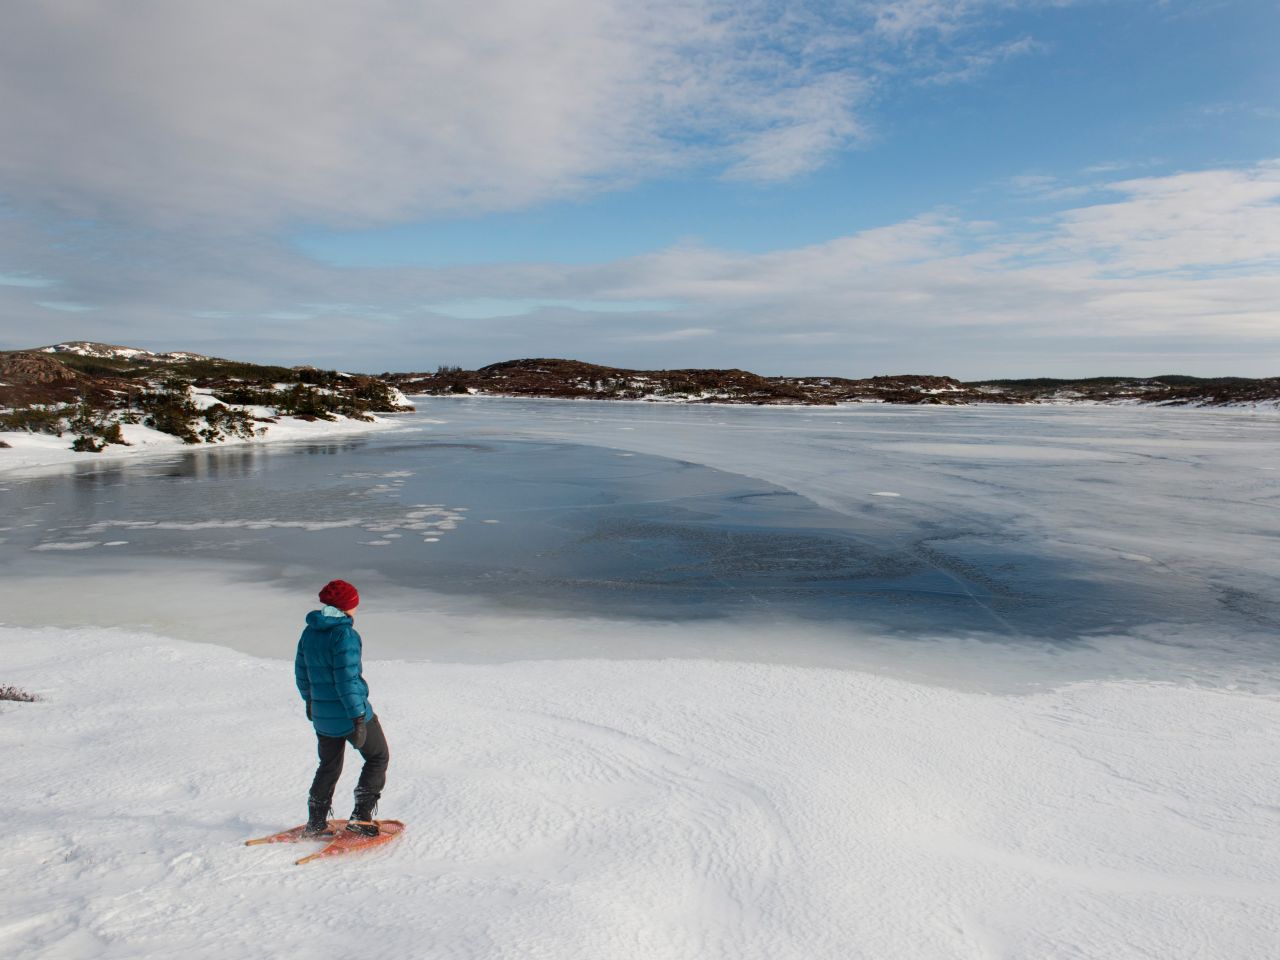 Fogo Island claims seven seasons, including frozen winter and a fall berry-picking season.